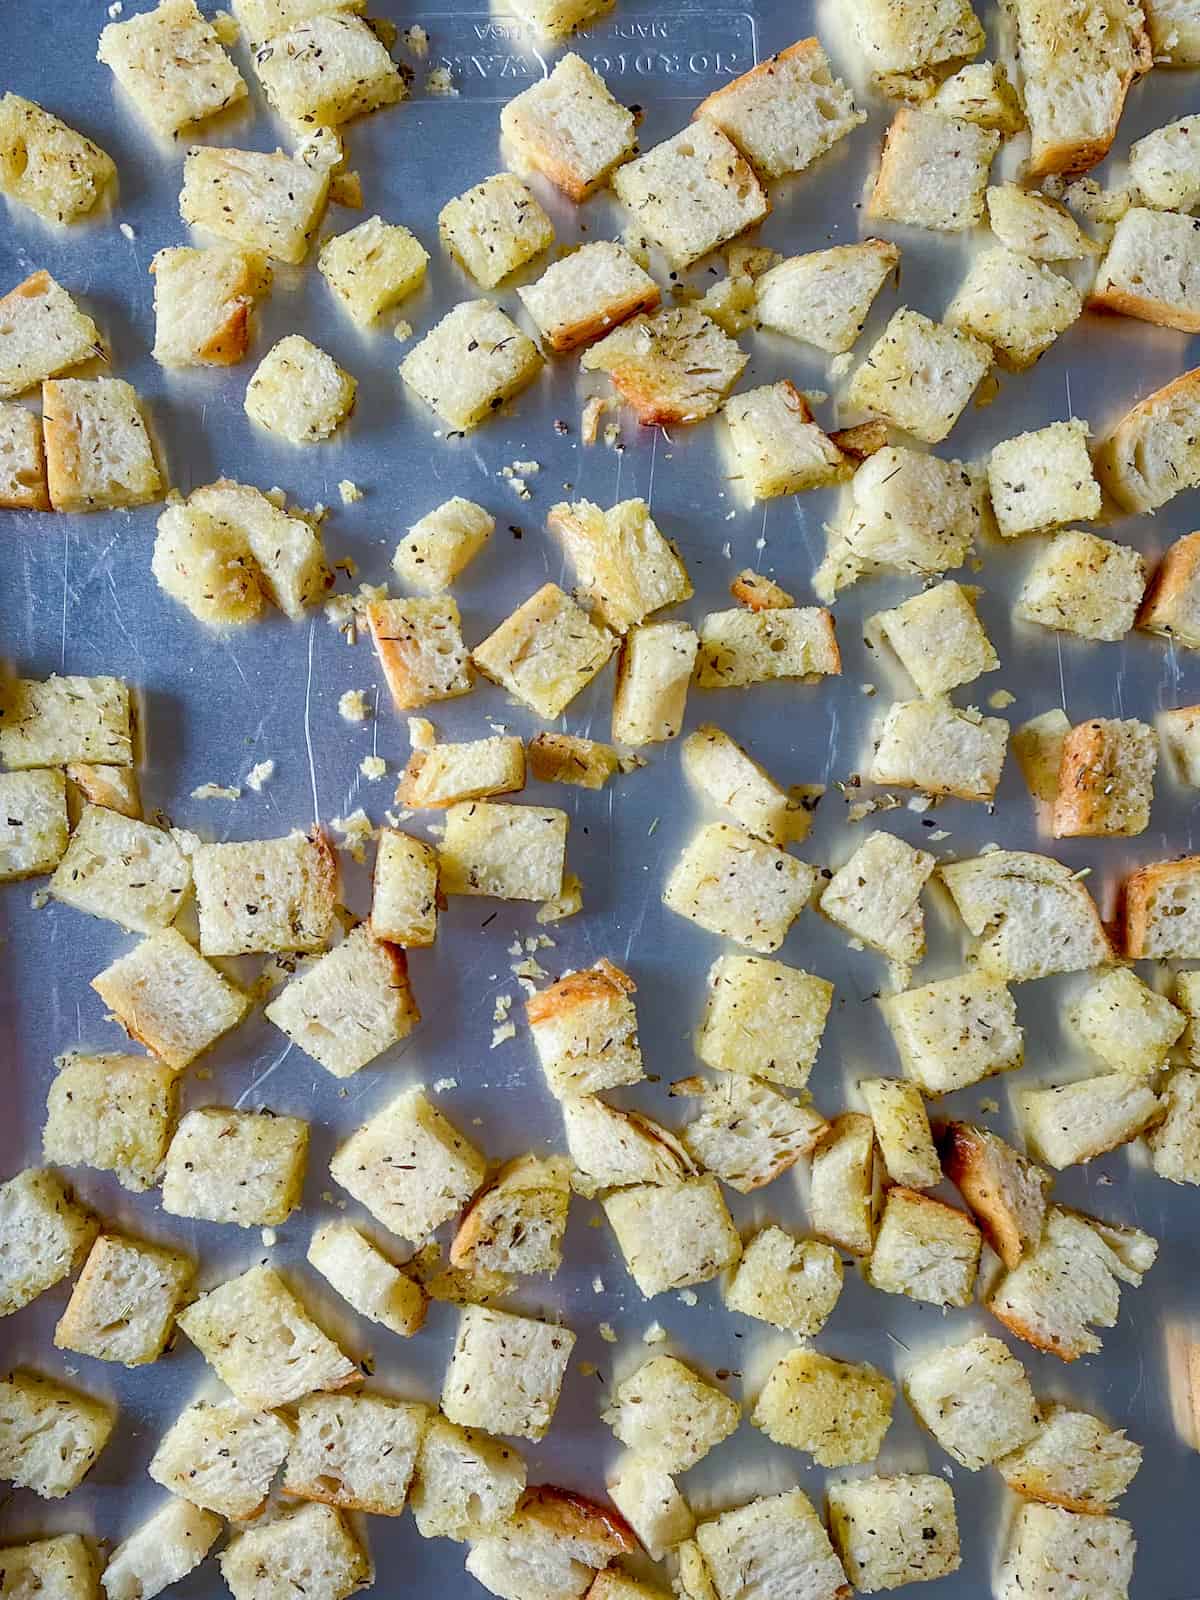 bread cubes coated in olive oil and spice blend on a baking sheet